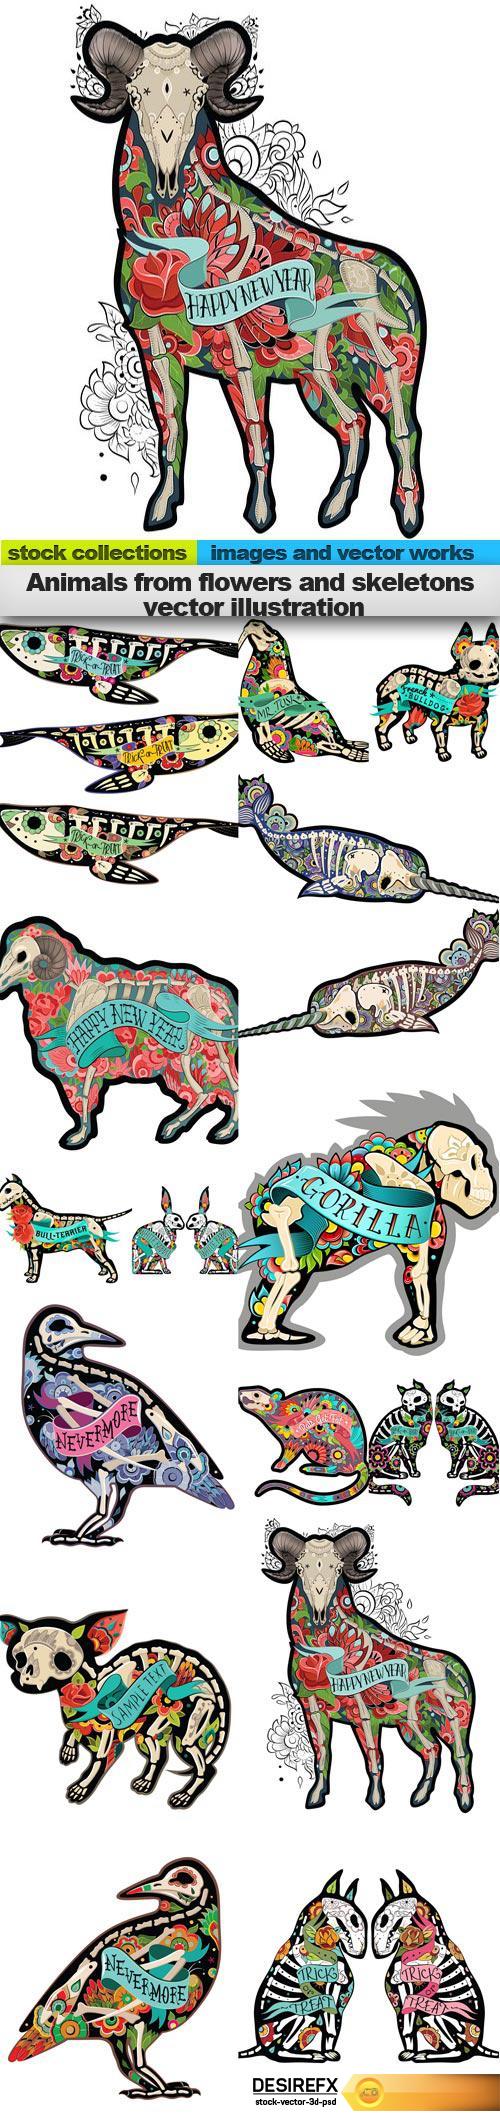 Animals from flowers and skeletons vector illustration, 15 x EPS